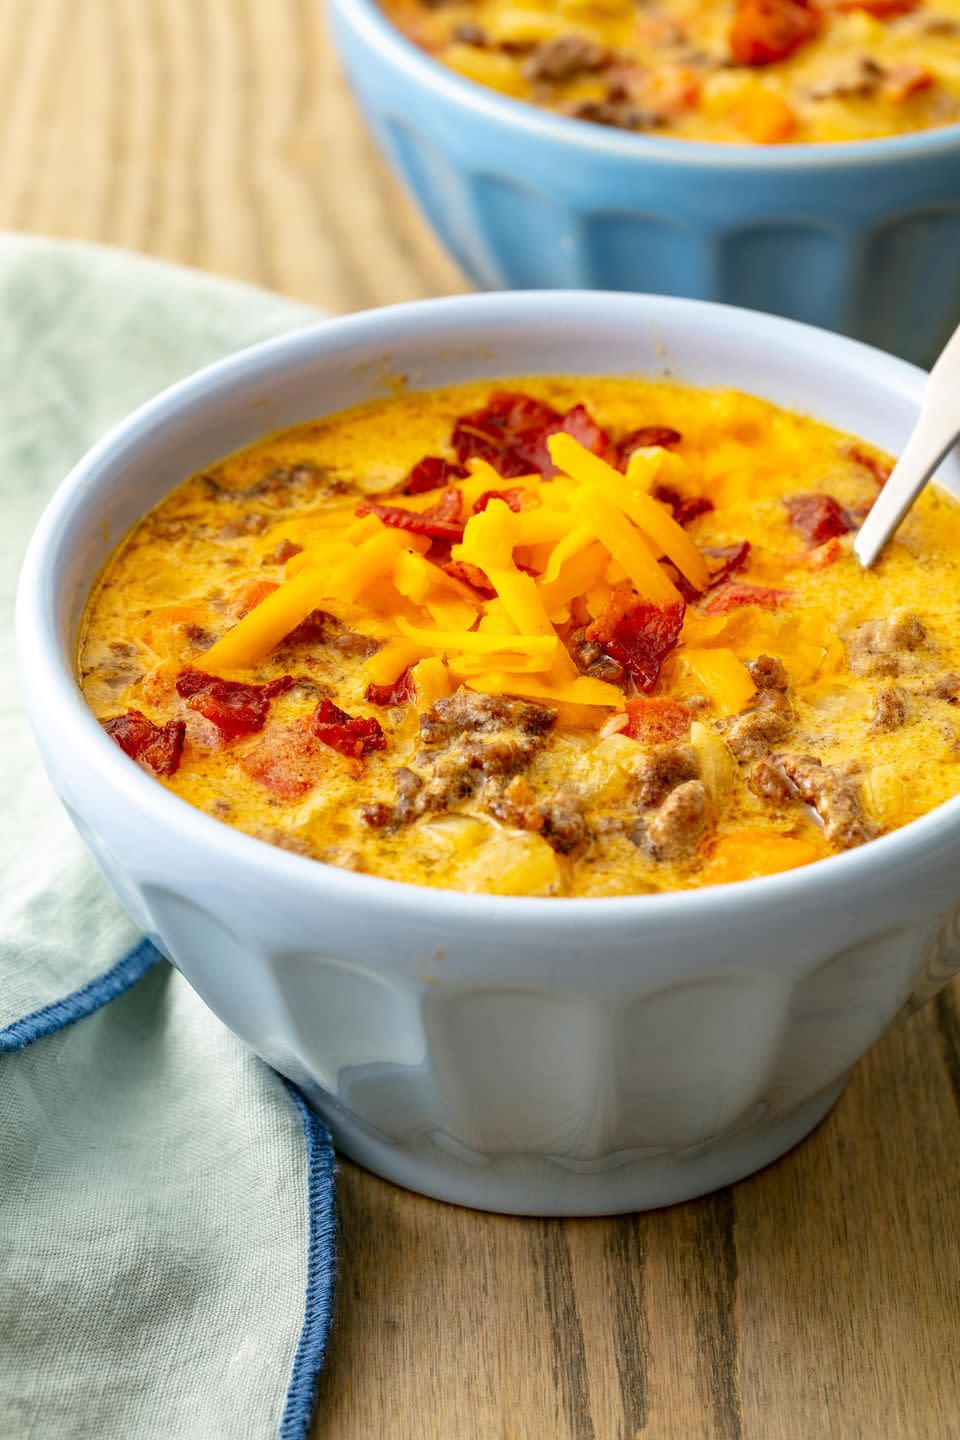 <p>Cheeseburger Soup is one of those recipes we saw on Pinterest and though, "why?!" But then we have a taste of it and totally understood. It's kinda like a summer-themed <a href="https://www.delish.com/cooking/recipe-ideas/a23515497/easy-beef-stew-recipe/" rel="nofollow noopener" target="_blank" data-ylk="slk:beef stew" class="link ">beef stew</a>, with a LOT more <a href="https://www.delish.com/cooking/recipe-ideas/g2729/best-burger-recipes/" rel="nofollow noopener" target="_blank" data-ylk="slk:burger" class="link ">burger</a> flavor. Grab a spoon.</p><p>Get the <strong><a href="https://www.delish.com/cooking/recipe-ideas/a21972133/easy-cheeseburger-soup-recipe/" rel="nofollow noopener" target="_blank" data-ylk="slk:Cheeseburger Soup recipe" class="link ">Cheeseburger Soup recipe</a></strong>.</p>